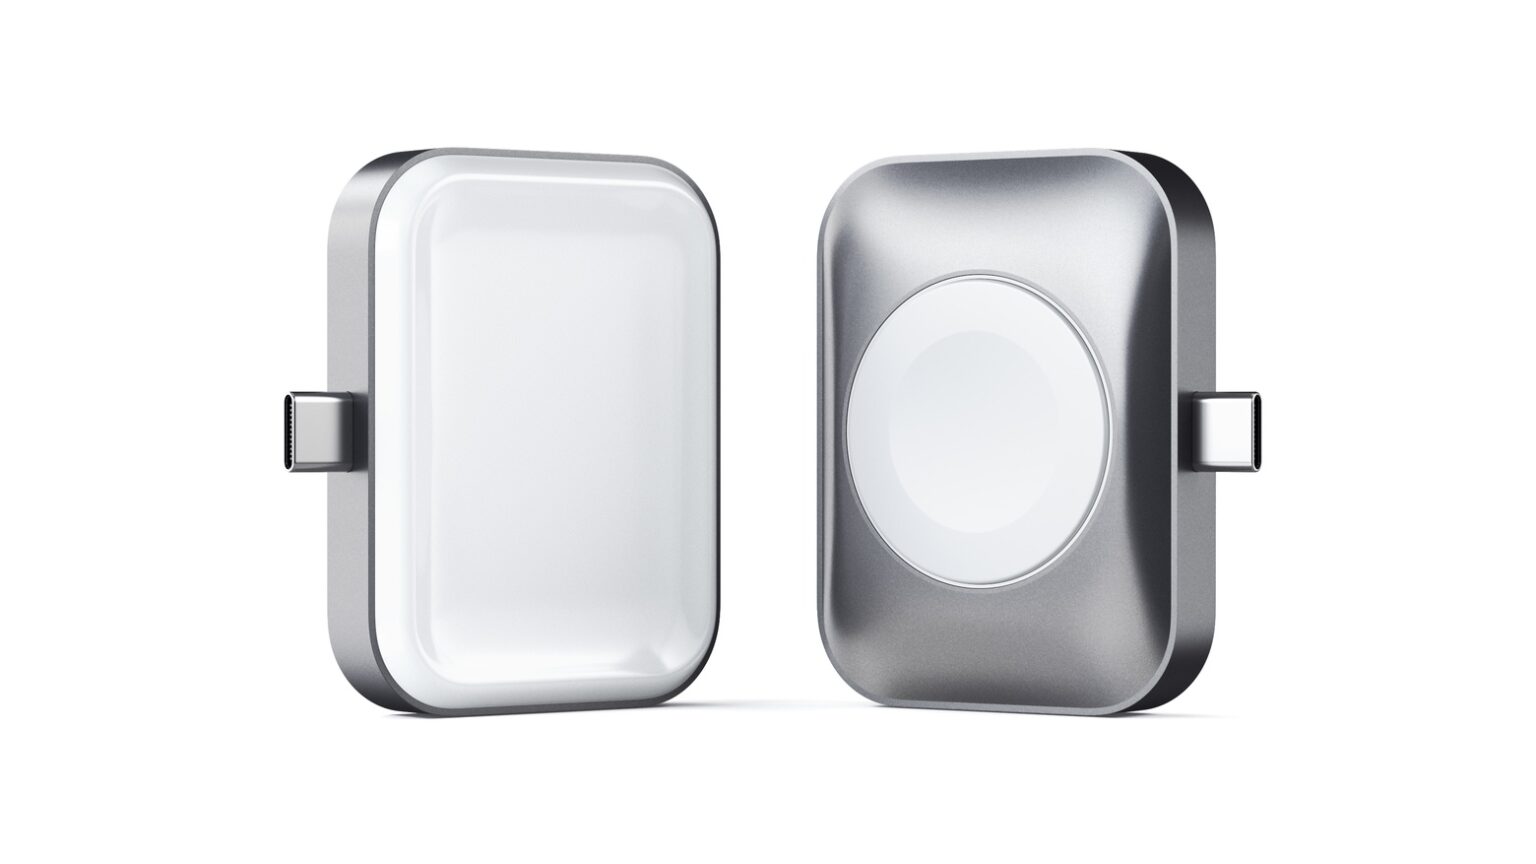 The Satechi USB-C Watch AirPods Charger takes on two Apple wearable devices.